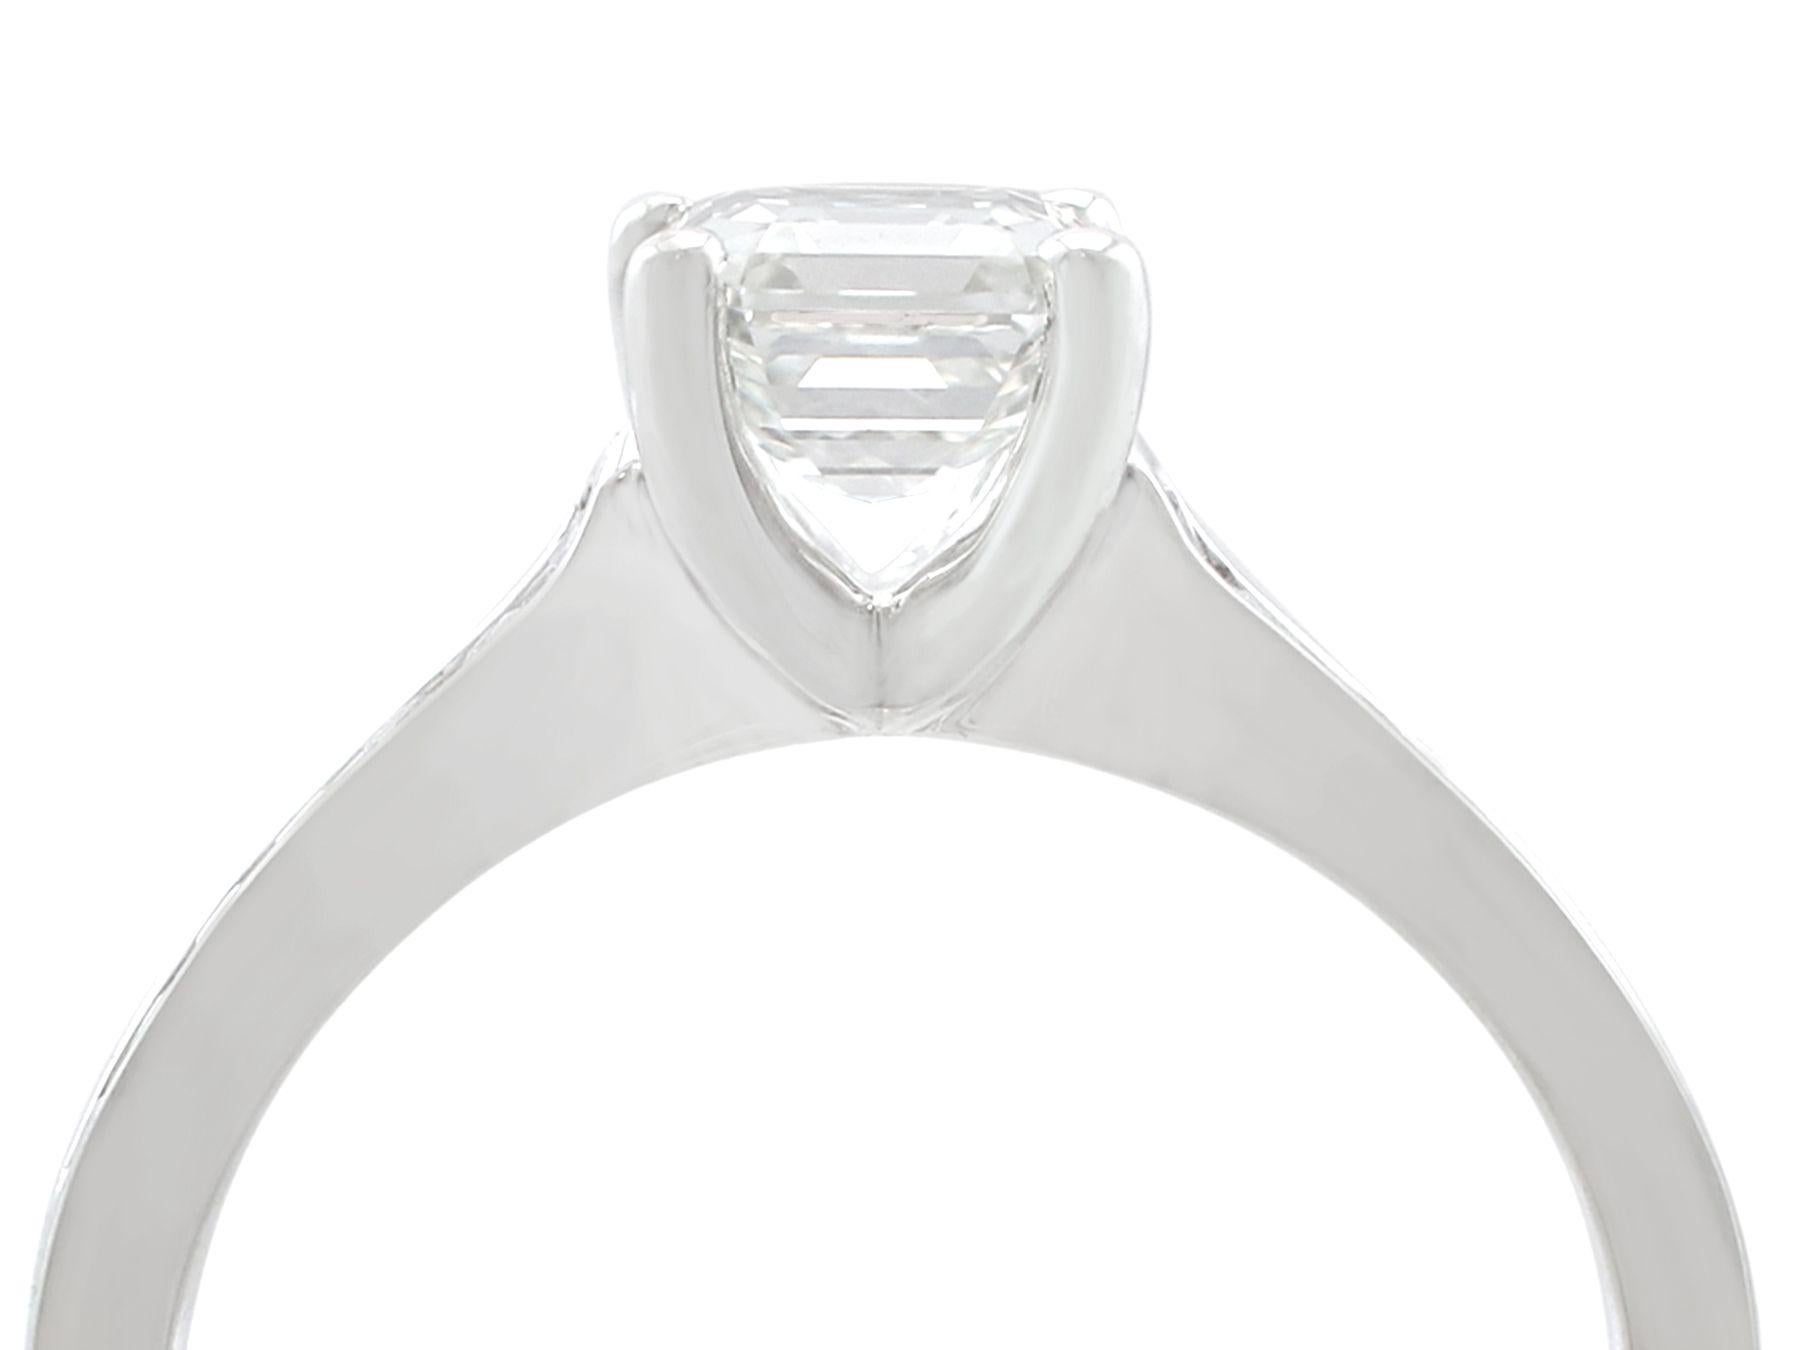 A stunning, fine and impressive 1.19 carat diamond and platinum solitaire ring; part of our diverse range of engagement rings and diamond jewellery.

This stunning contemporary diamond solitaire ring has been crafted in platinum.

The simple four